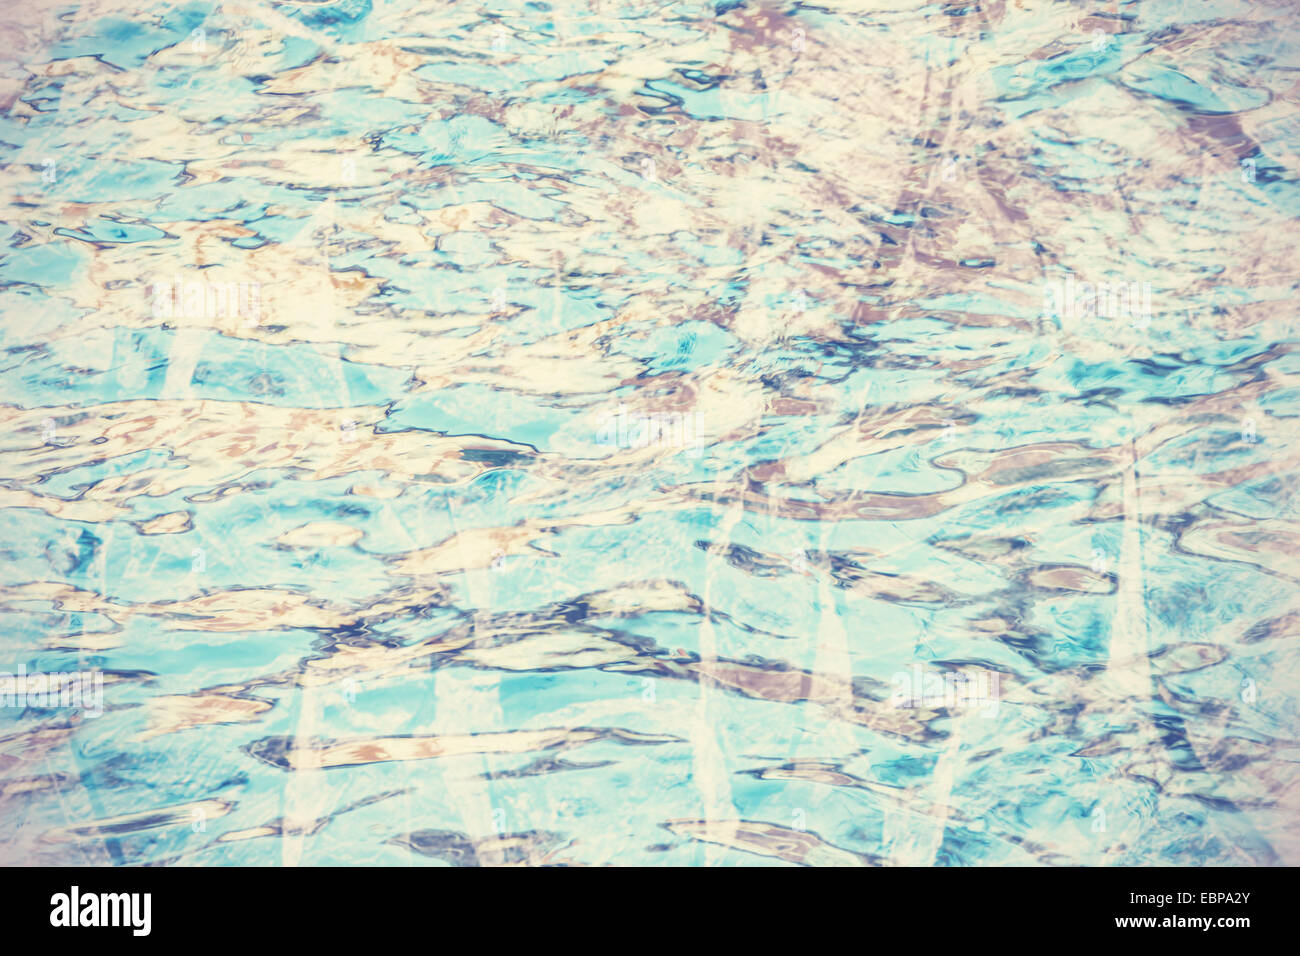 Retro abstract background made of reflections in water. Stock Photo